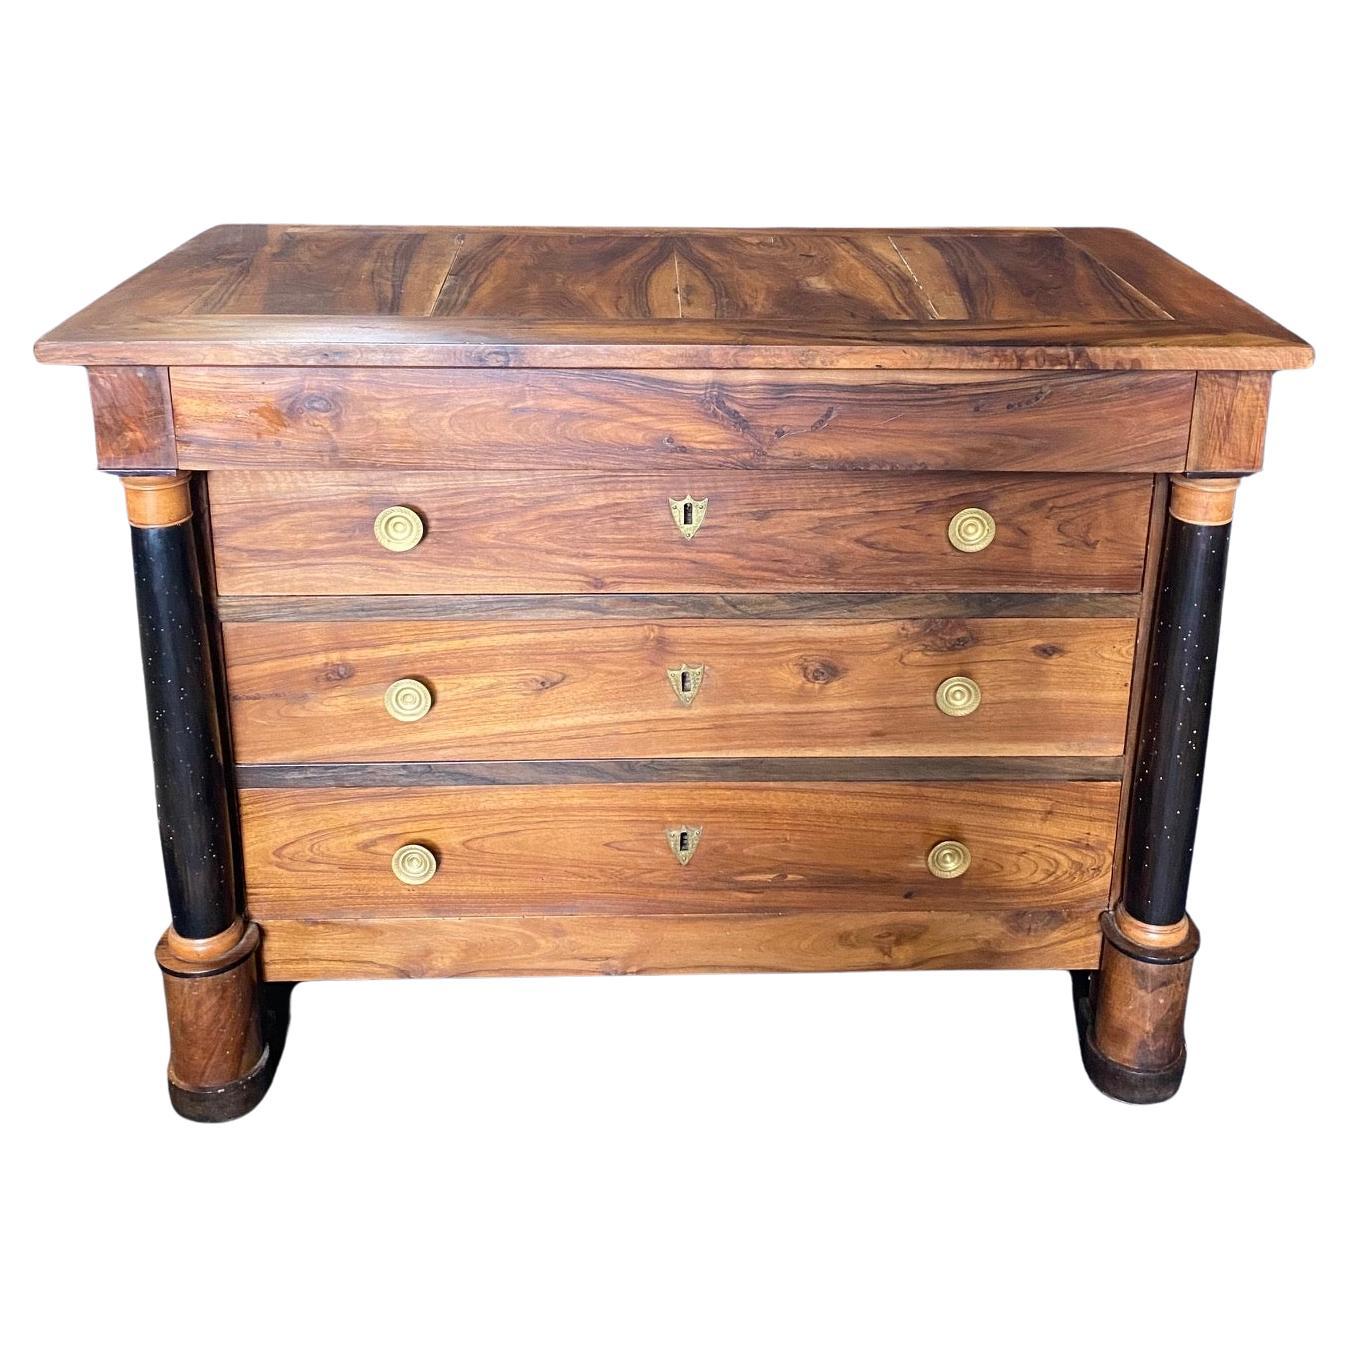 French 19th Century Empire Neoclassical Mahogany Commode Chest of Drawers For Sale